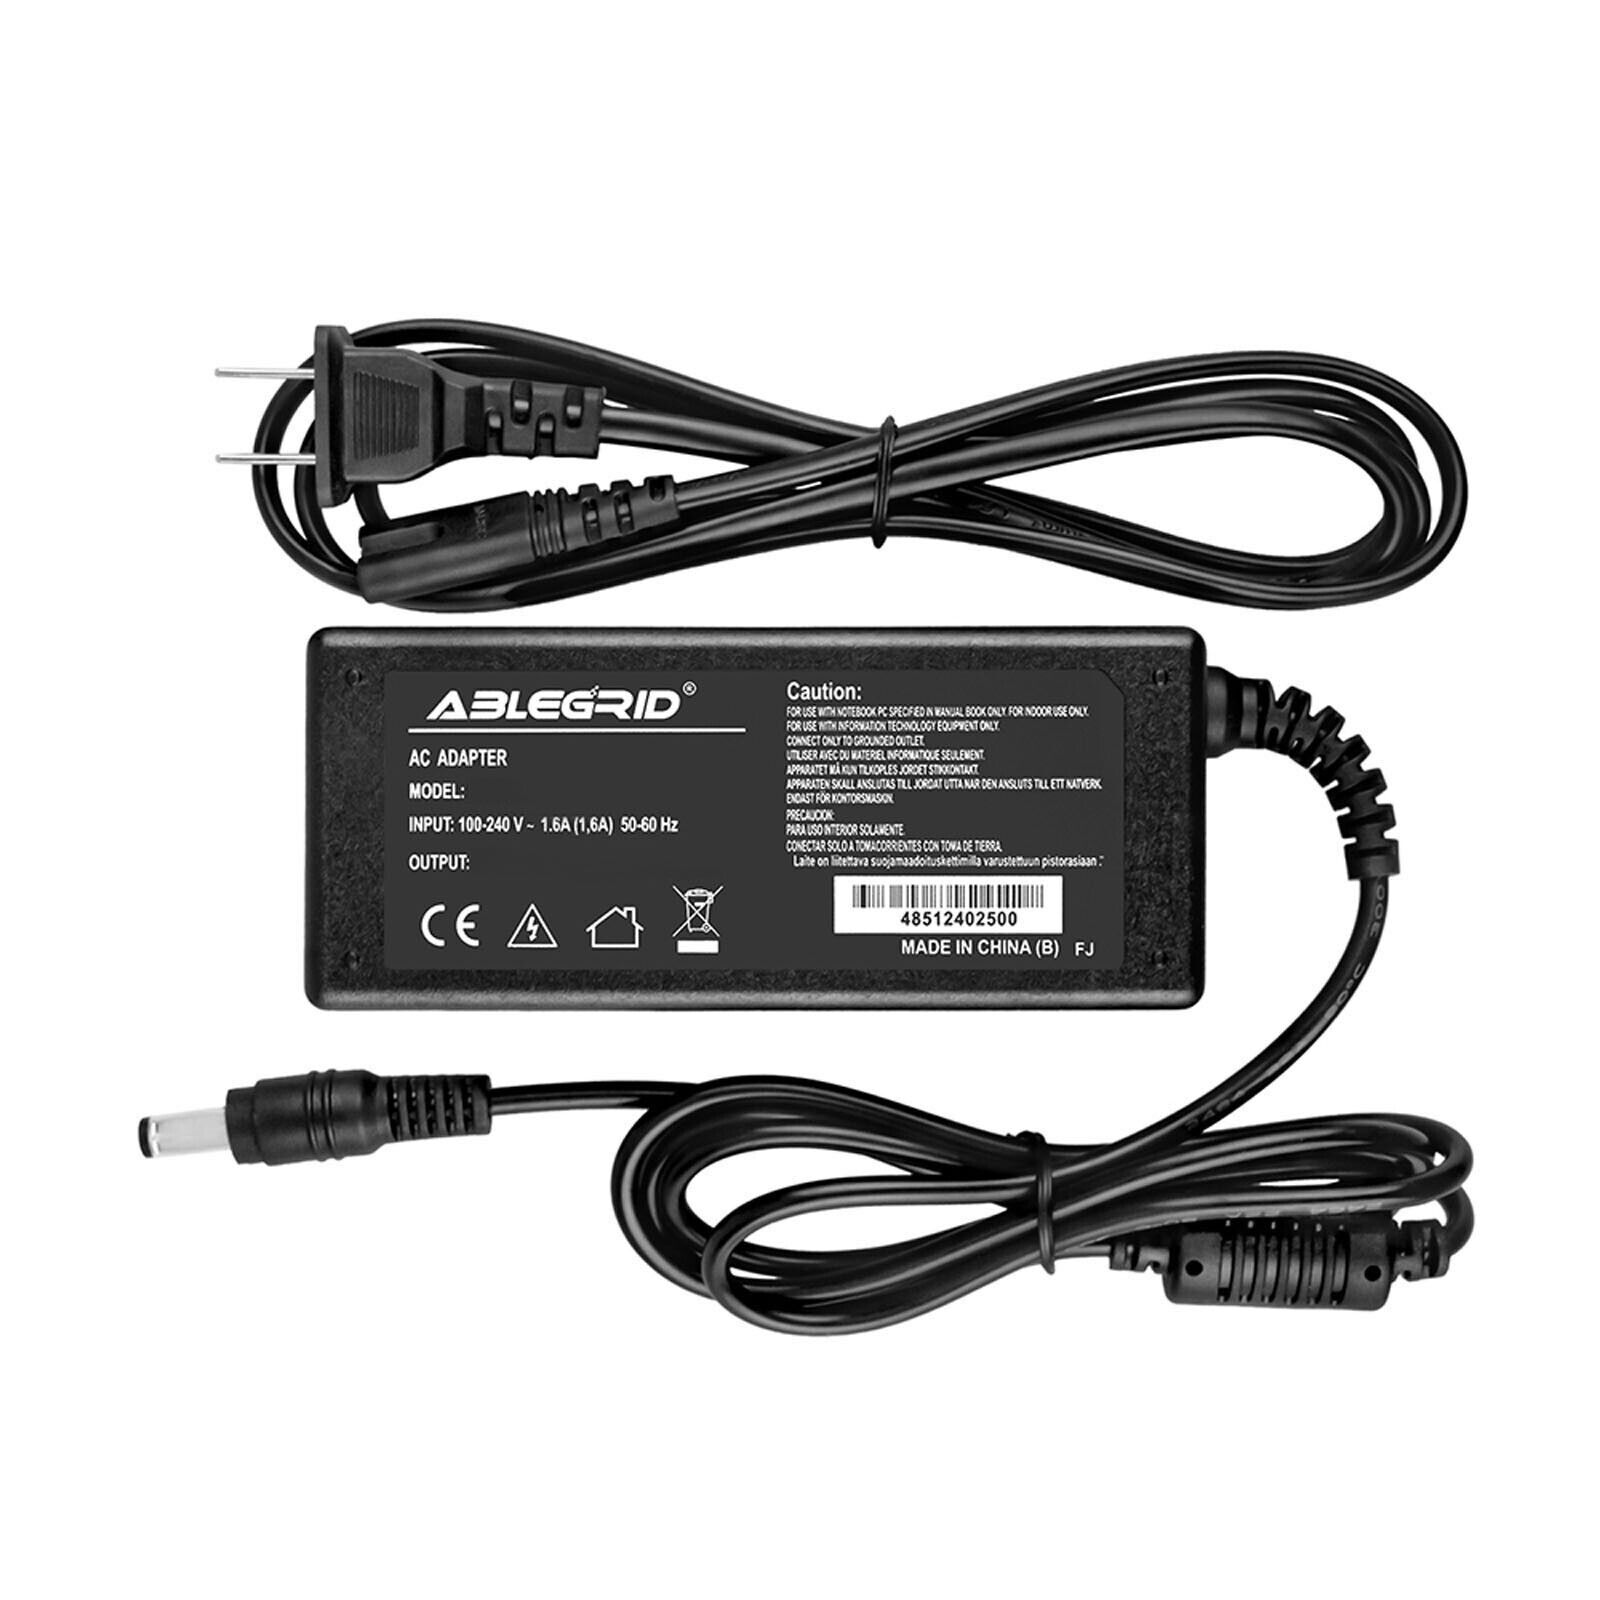 AC Adapter Charger for Elo touch screen POS monitor E334335 Power Supply Cord